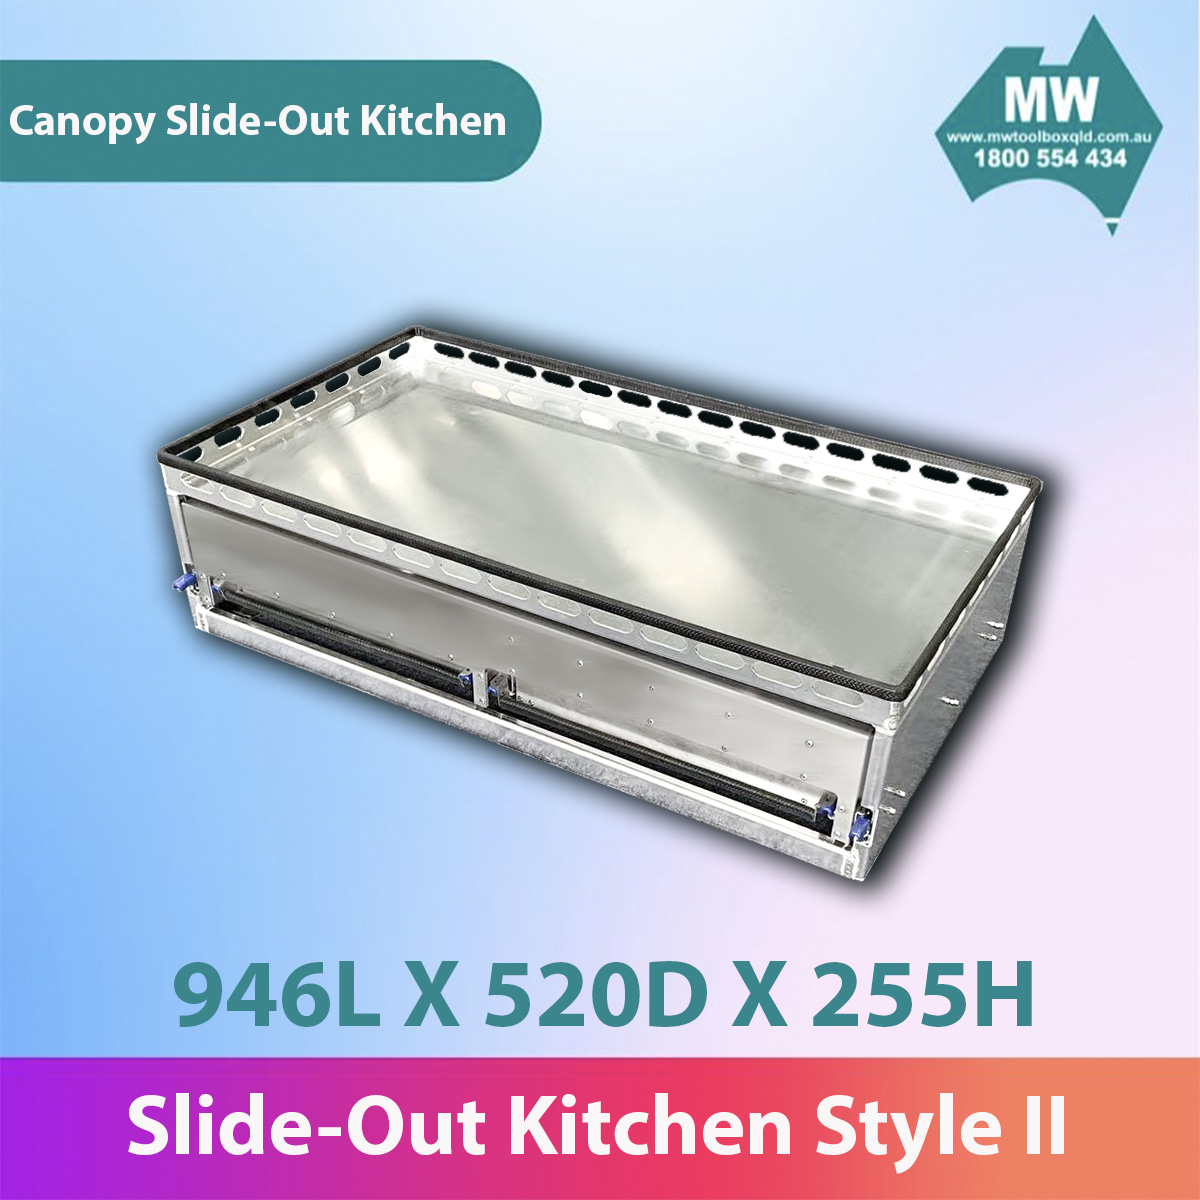 MW SLIDE OUT KITCHEN CANOPY KITCHEN STYLE II-1